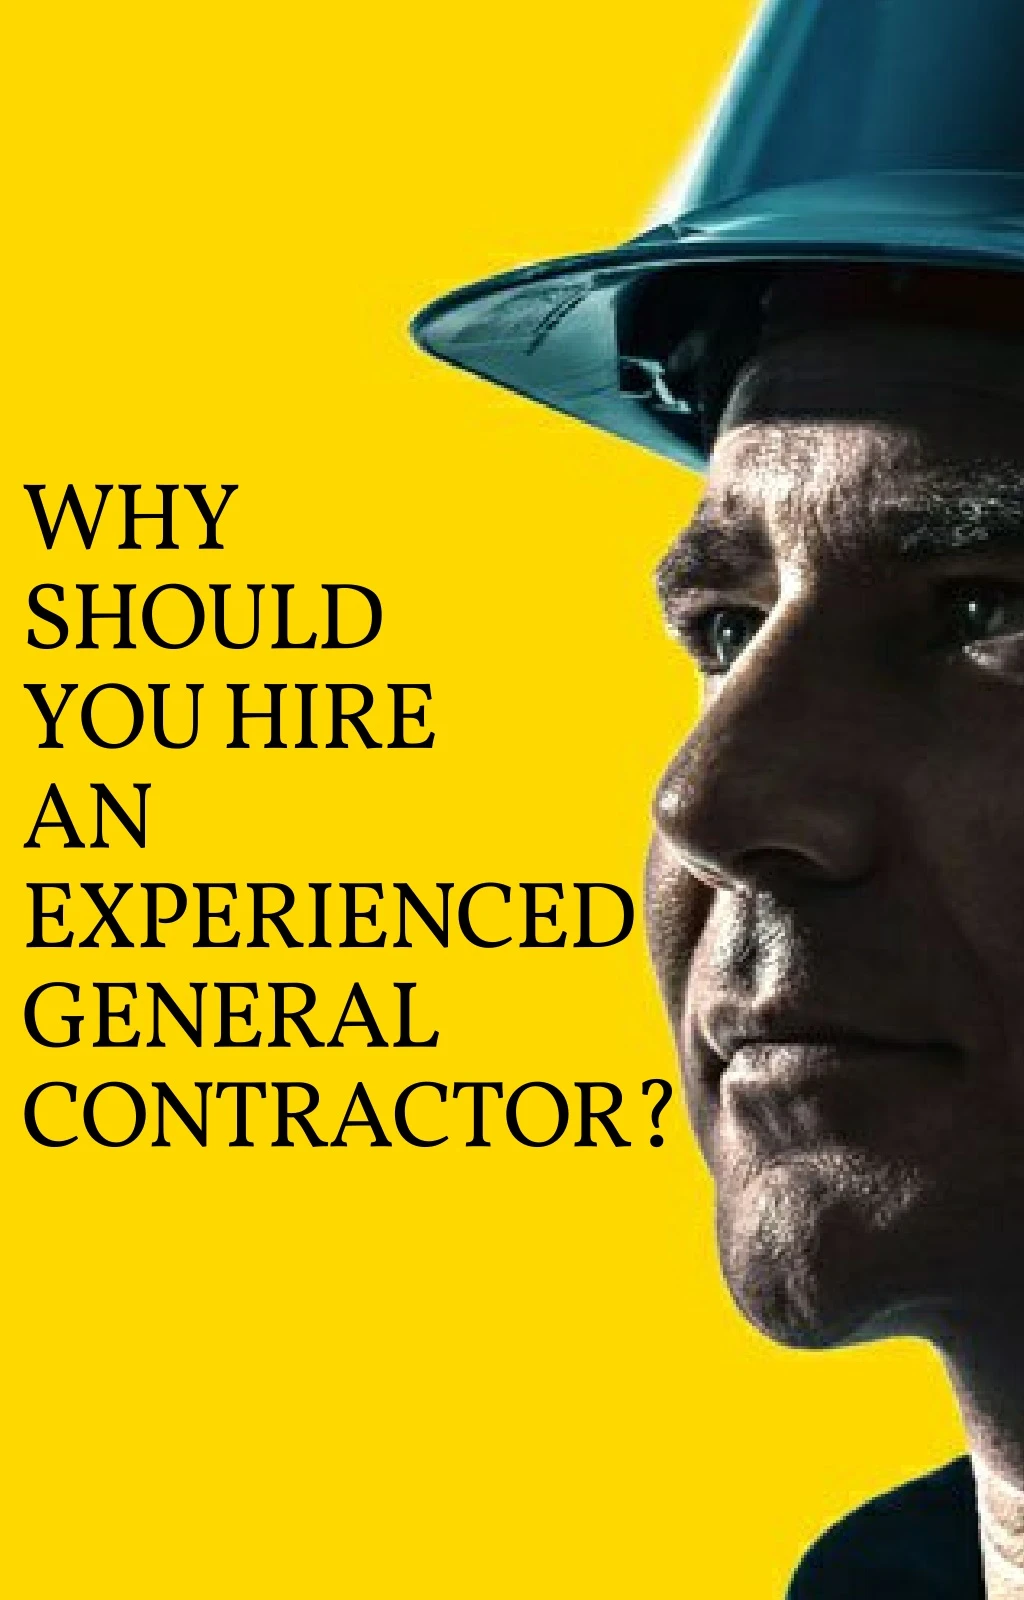 why should you hire an experienced general